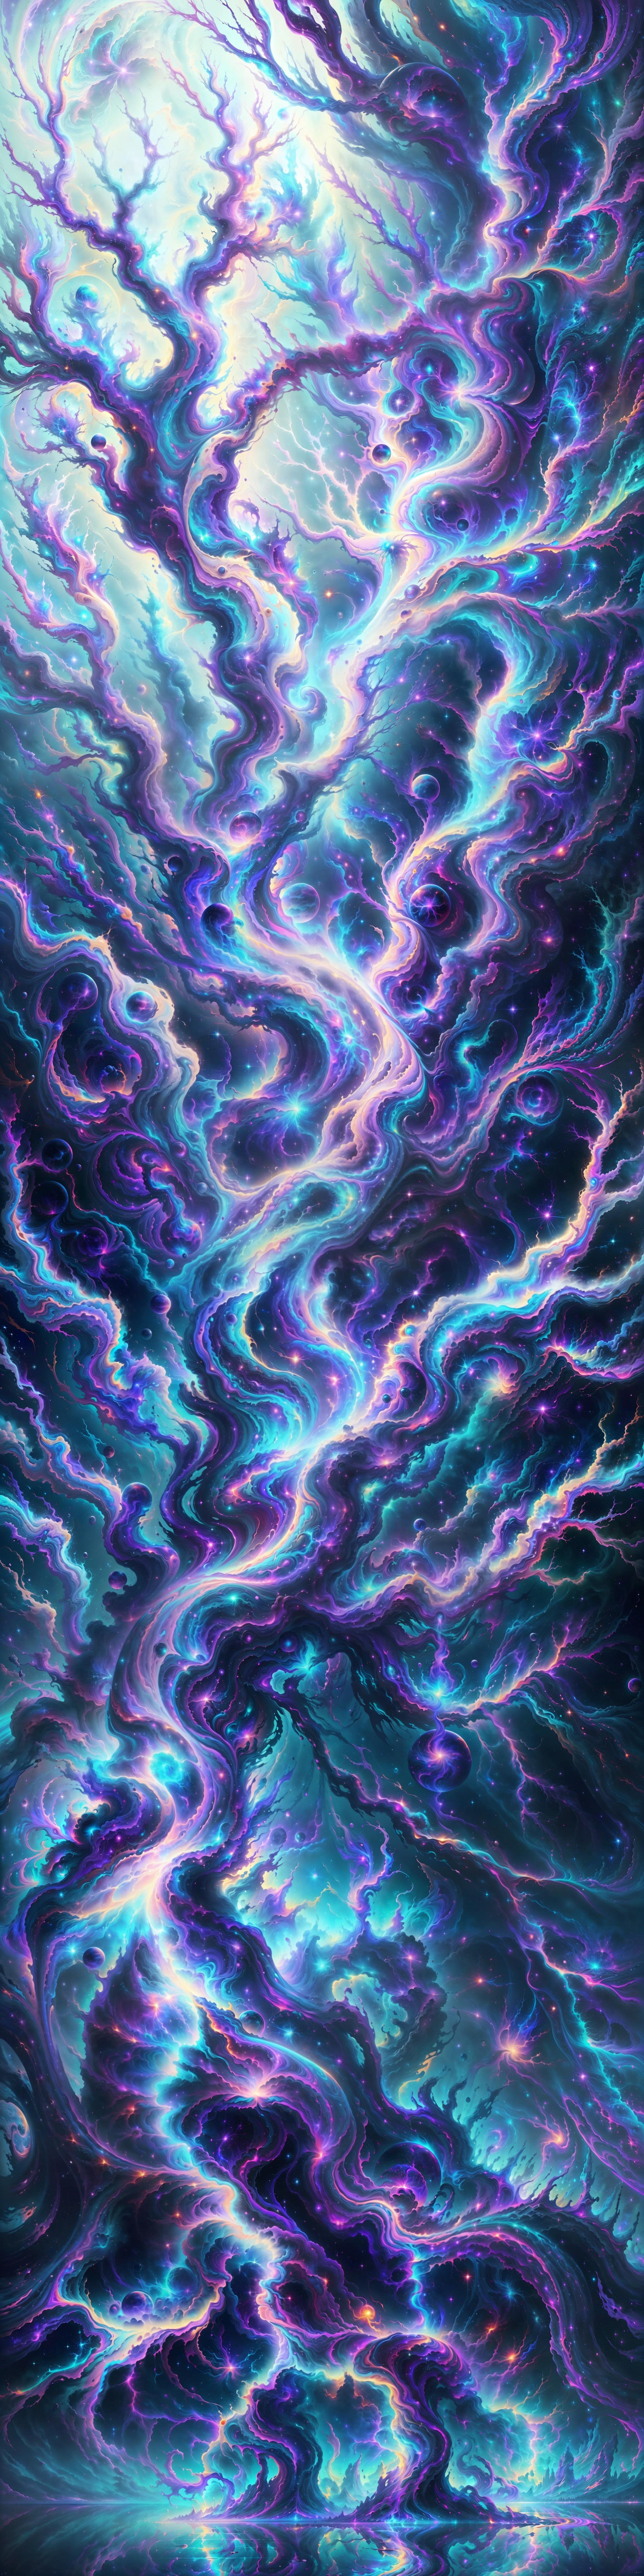 Purple and Blue Swirling Clouds in Space - Artistic Abstract Nature Scene